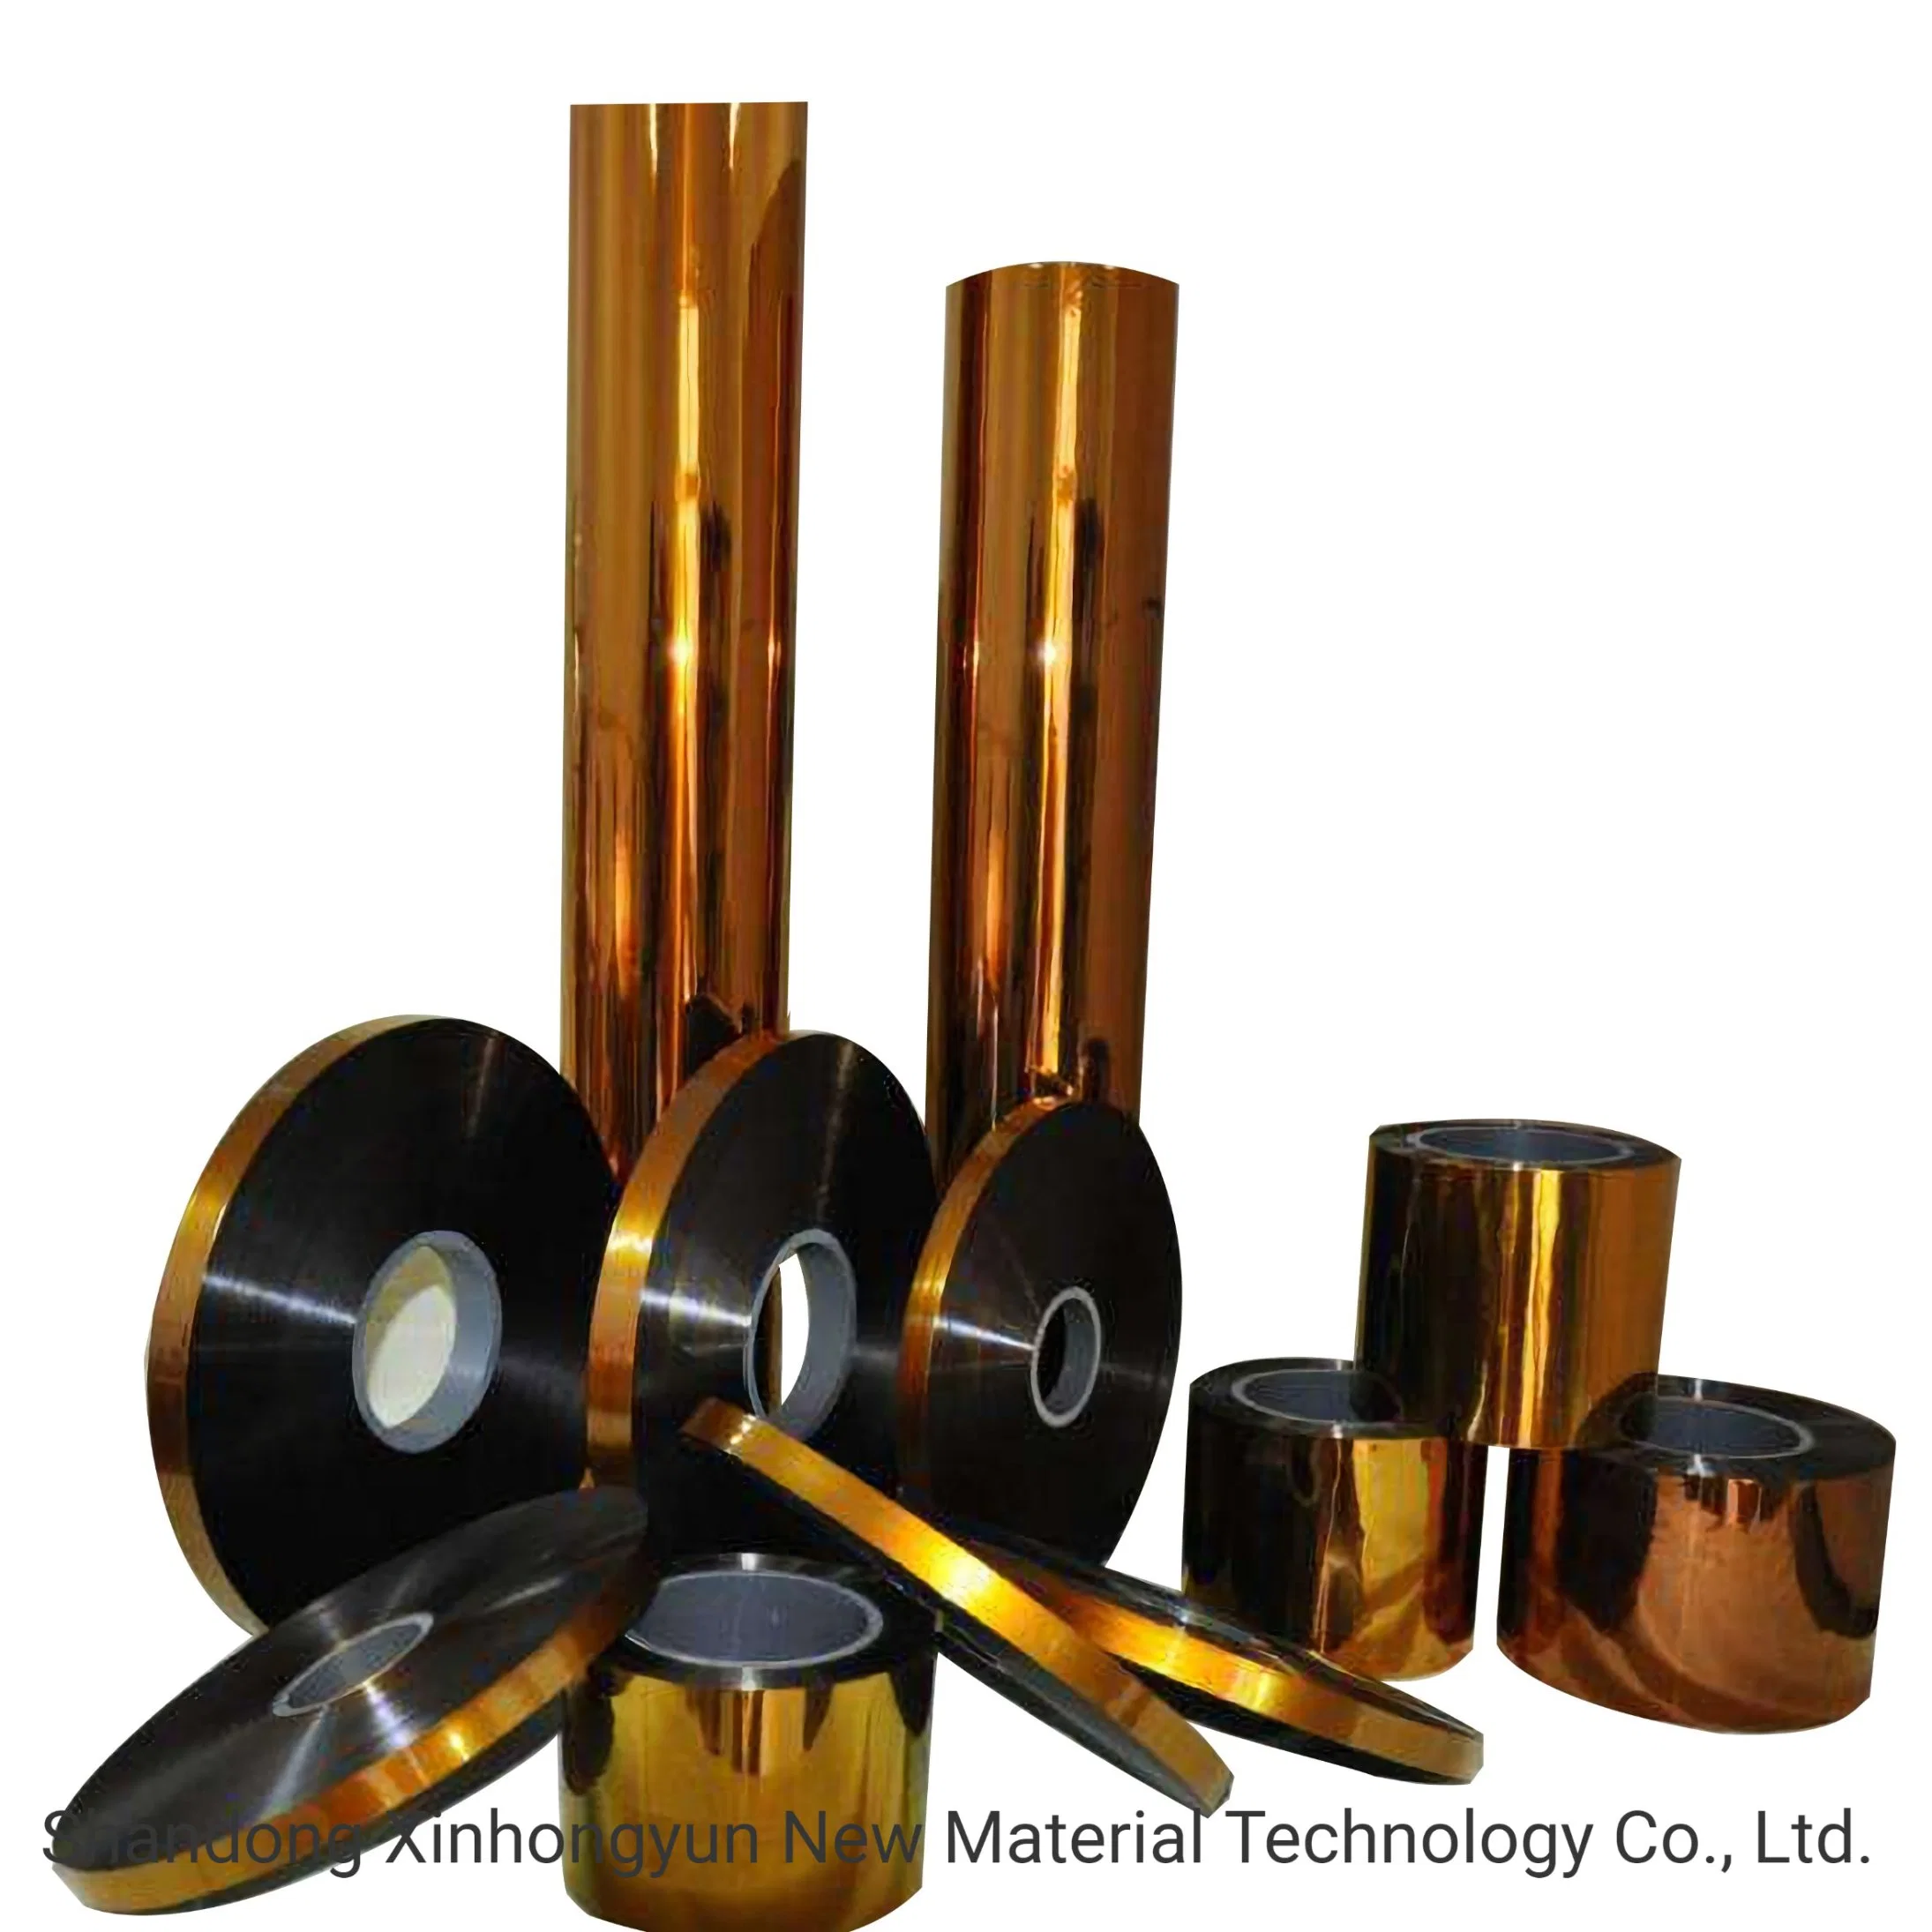 Free Sample Polyimide Film Insulation Material for Wire and Cable Wrapping / Making Adhesive Tape